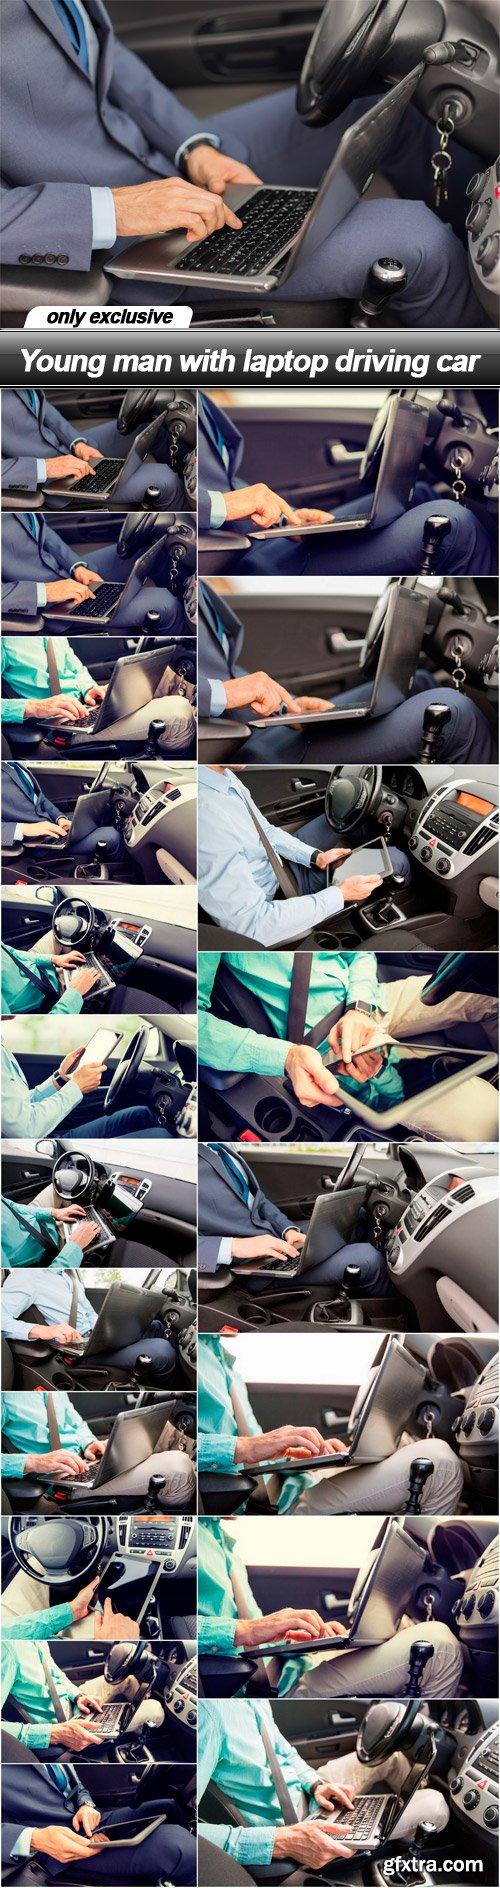 Young man with laptop driving car - 20 UHQ JPEG